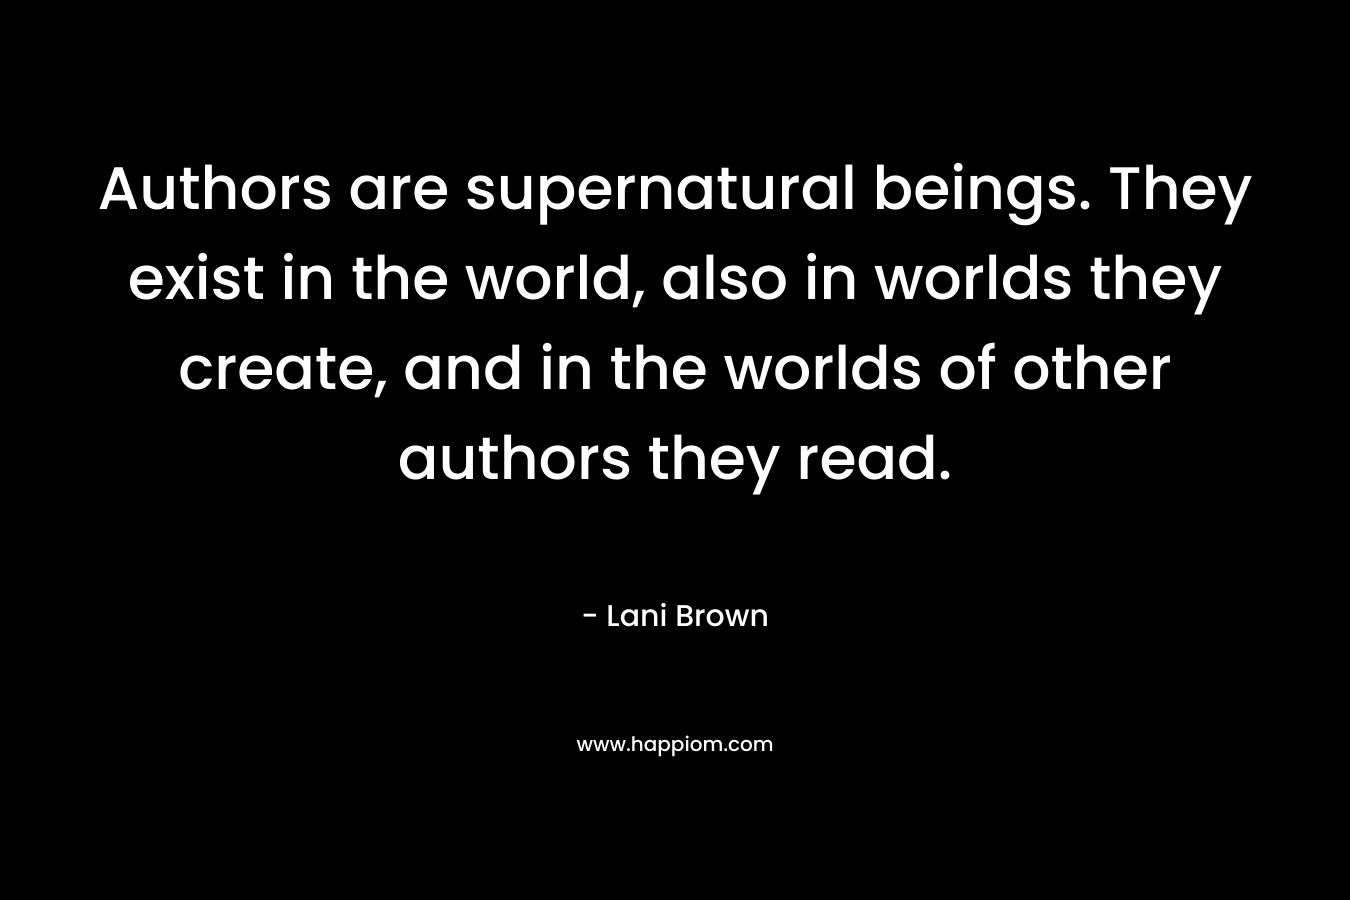 Authors are supernatural beings. They exist in the world, also in worlds they create, and in the worlds of other authors they read.